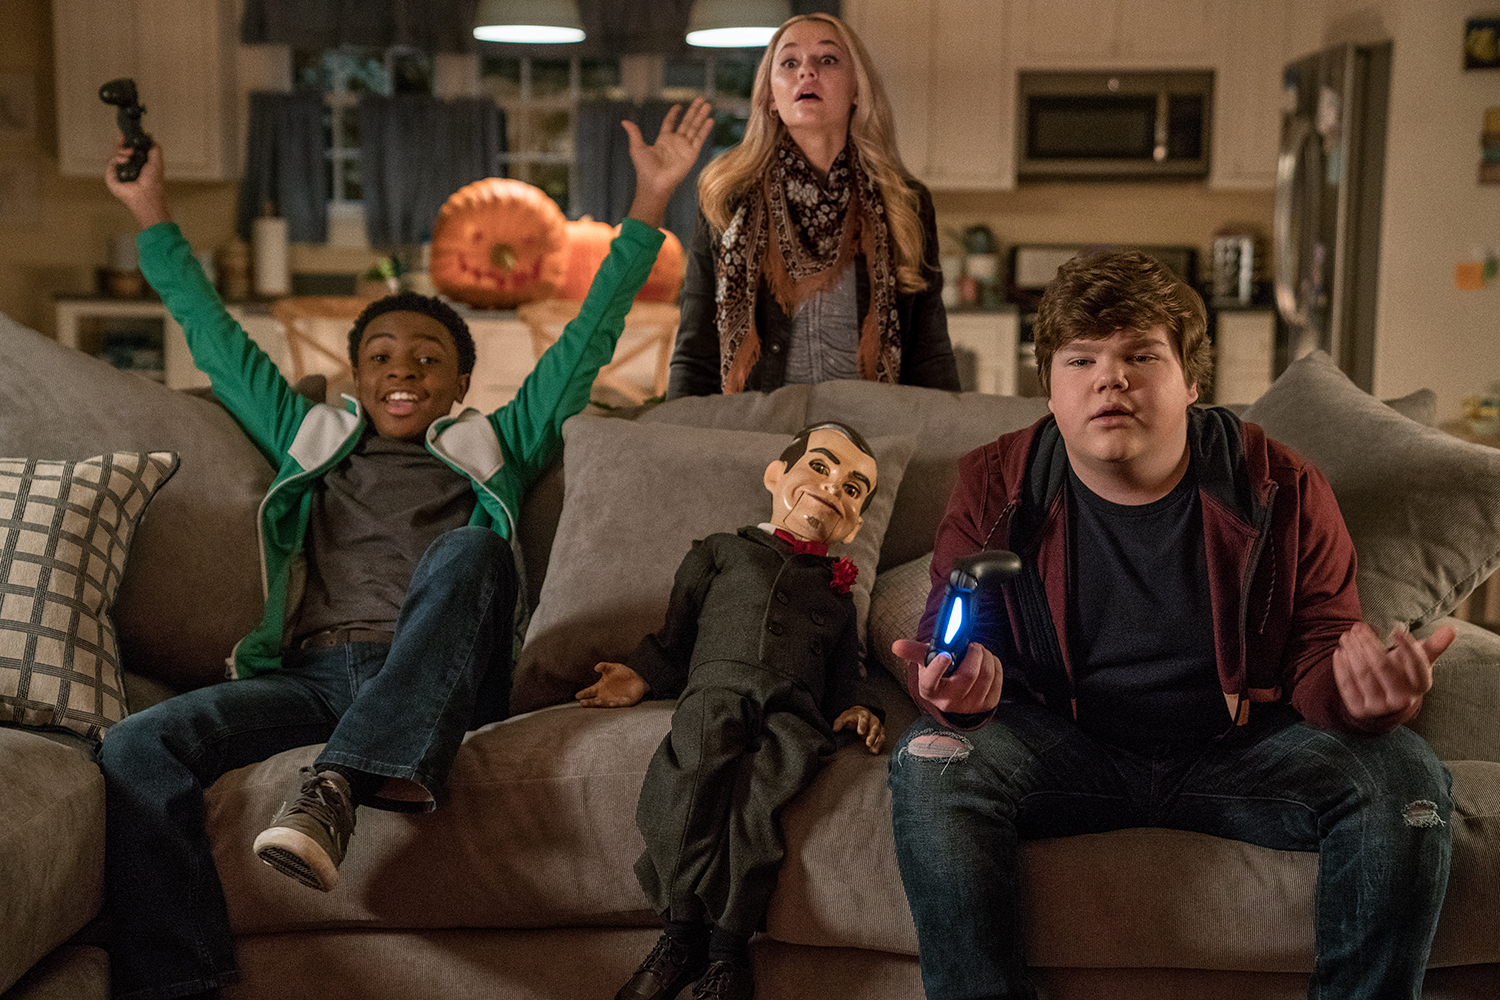 'Goosebumps 2' worth a matinee ticket